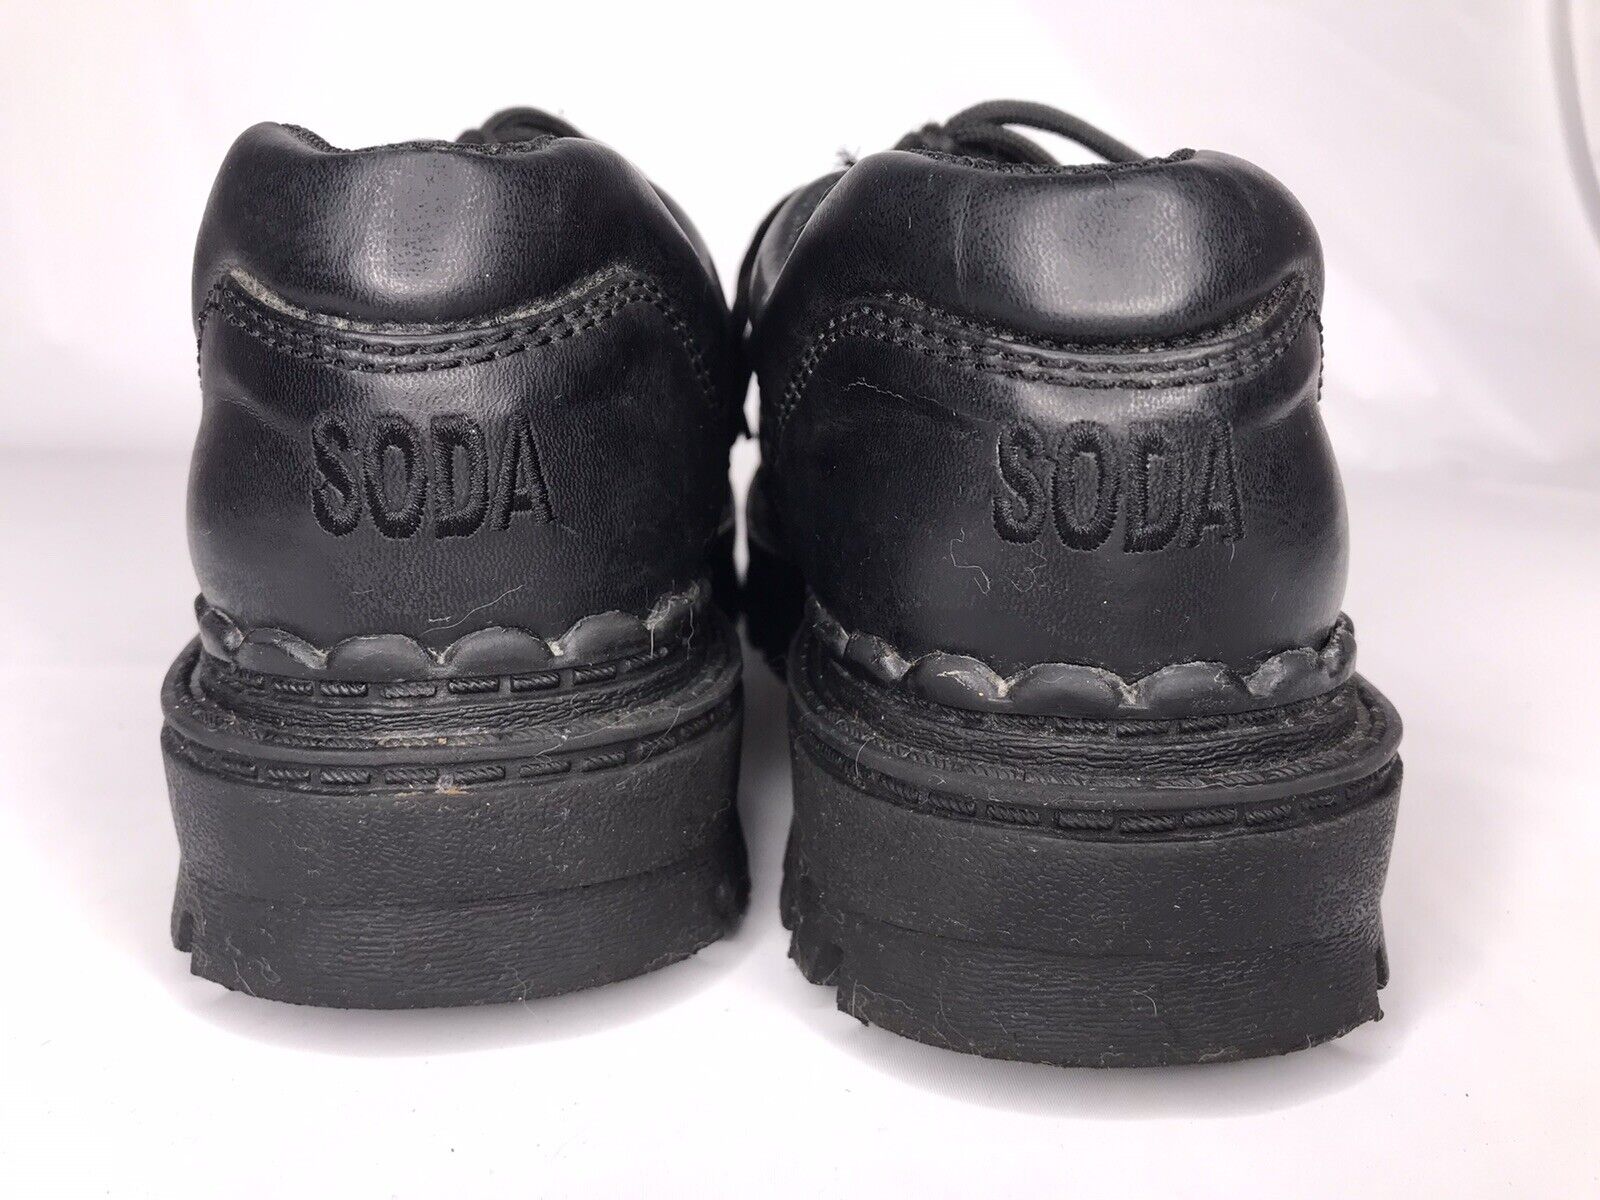 Vintage 90s Y2k Chunky Soda Sneakers Shoes Platform Faux Leather 8 8.5 9 Women’s